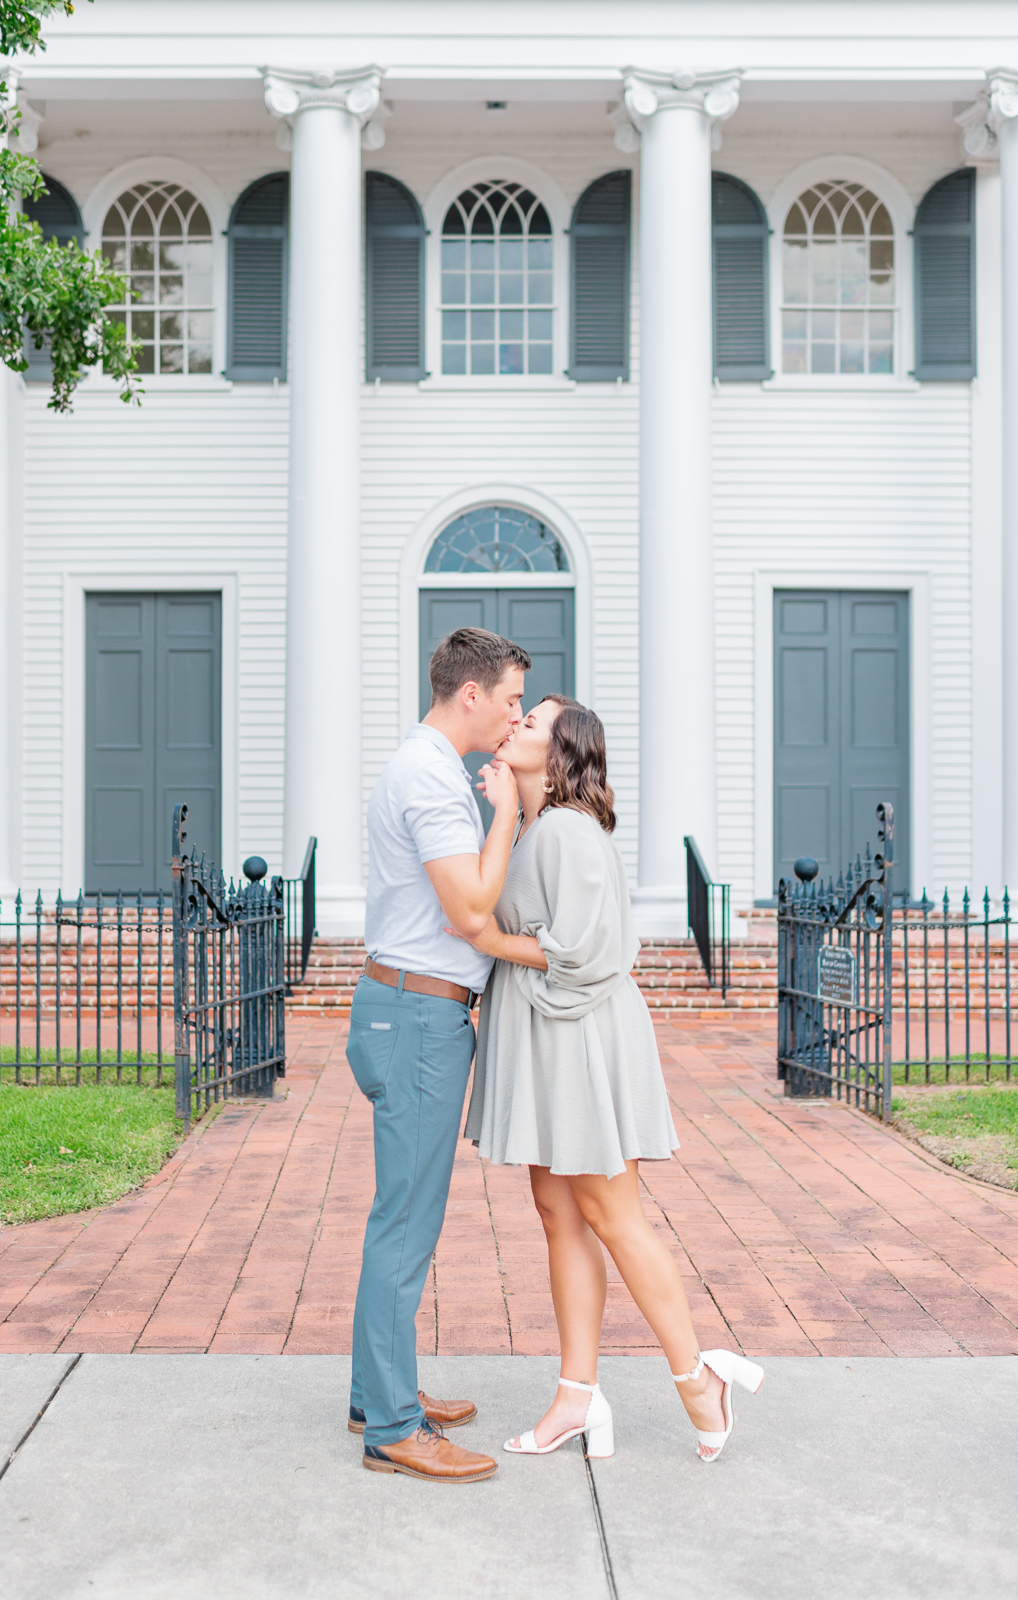 Katelyn and Peter's engagement session